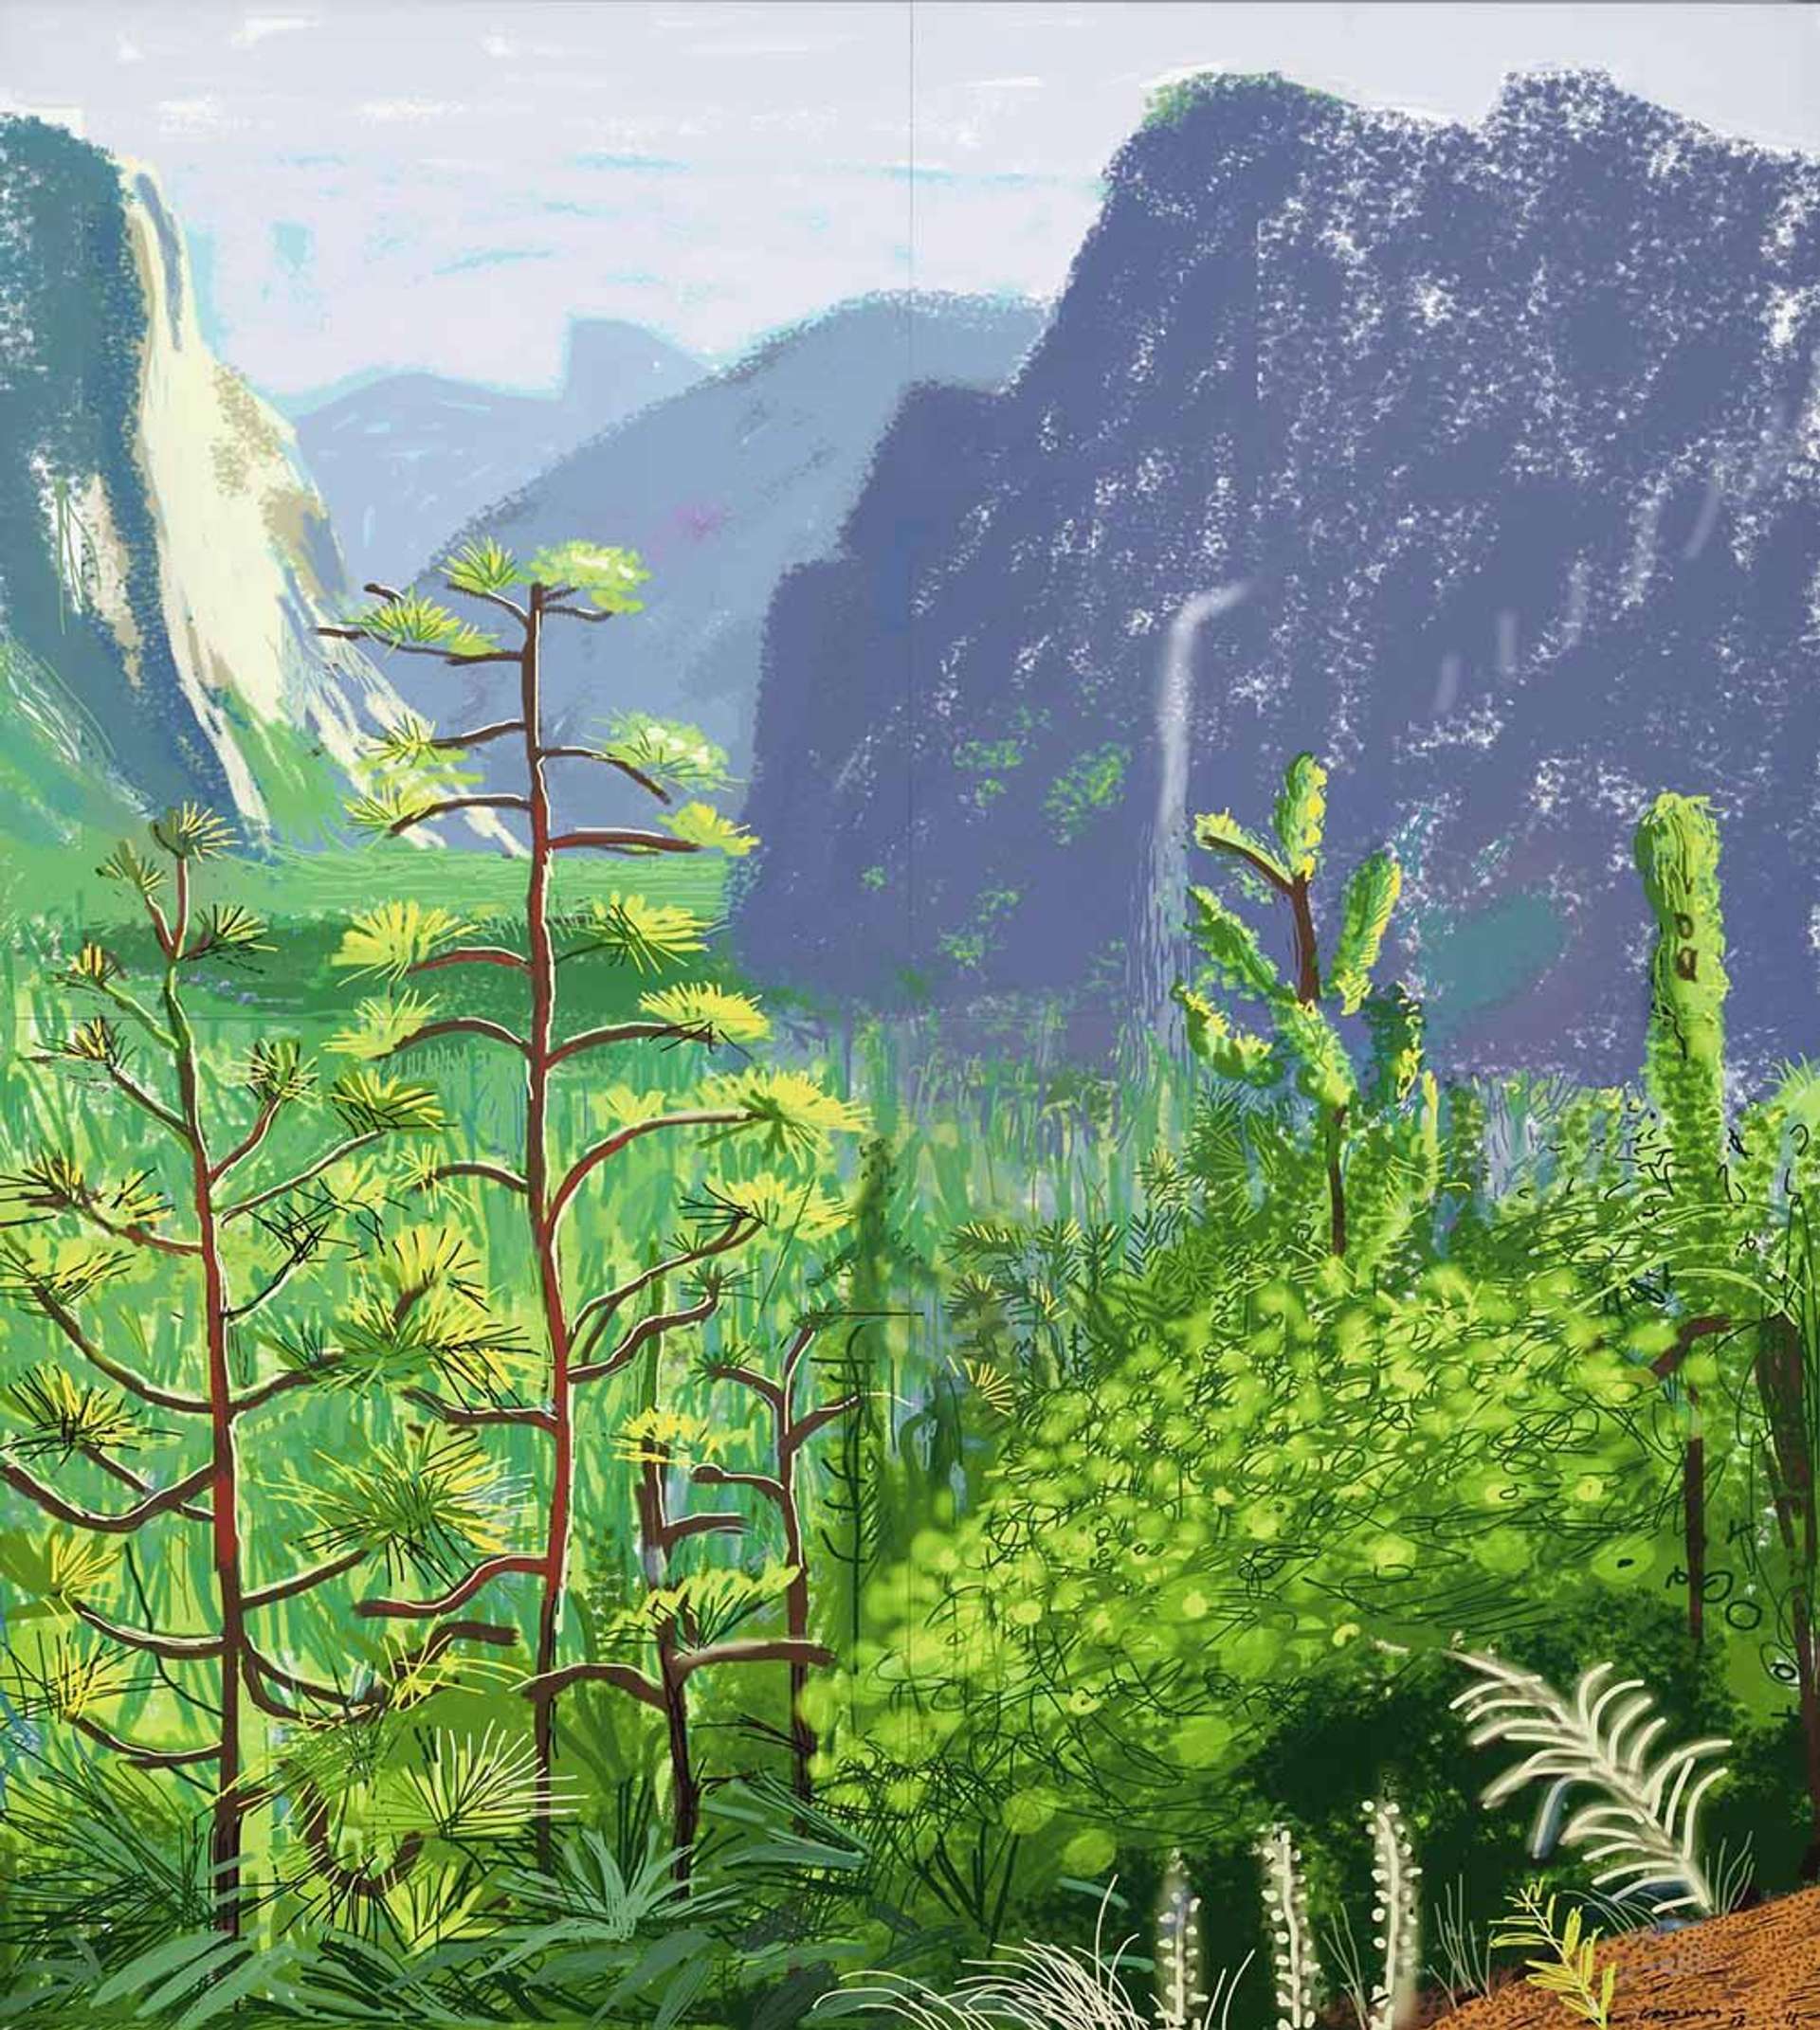 A landscape view of Yosemite by David Hockney, featuring bright green trees in the foreground and a large grey rocky outcrop in the background.